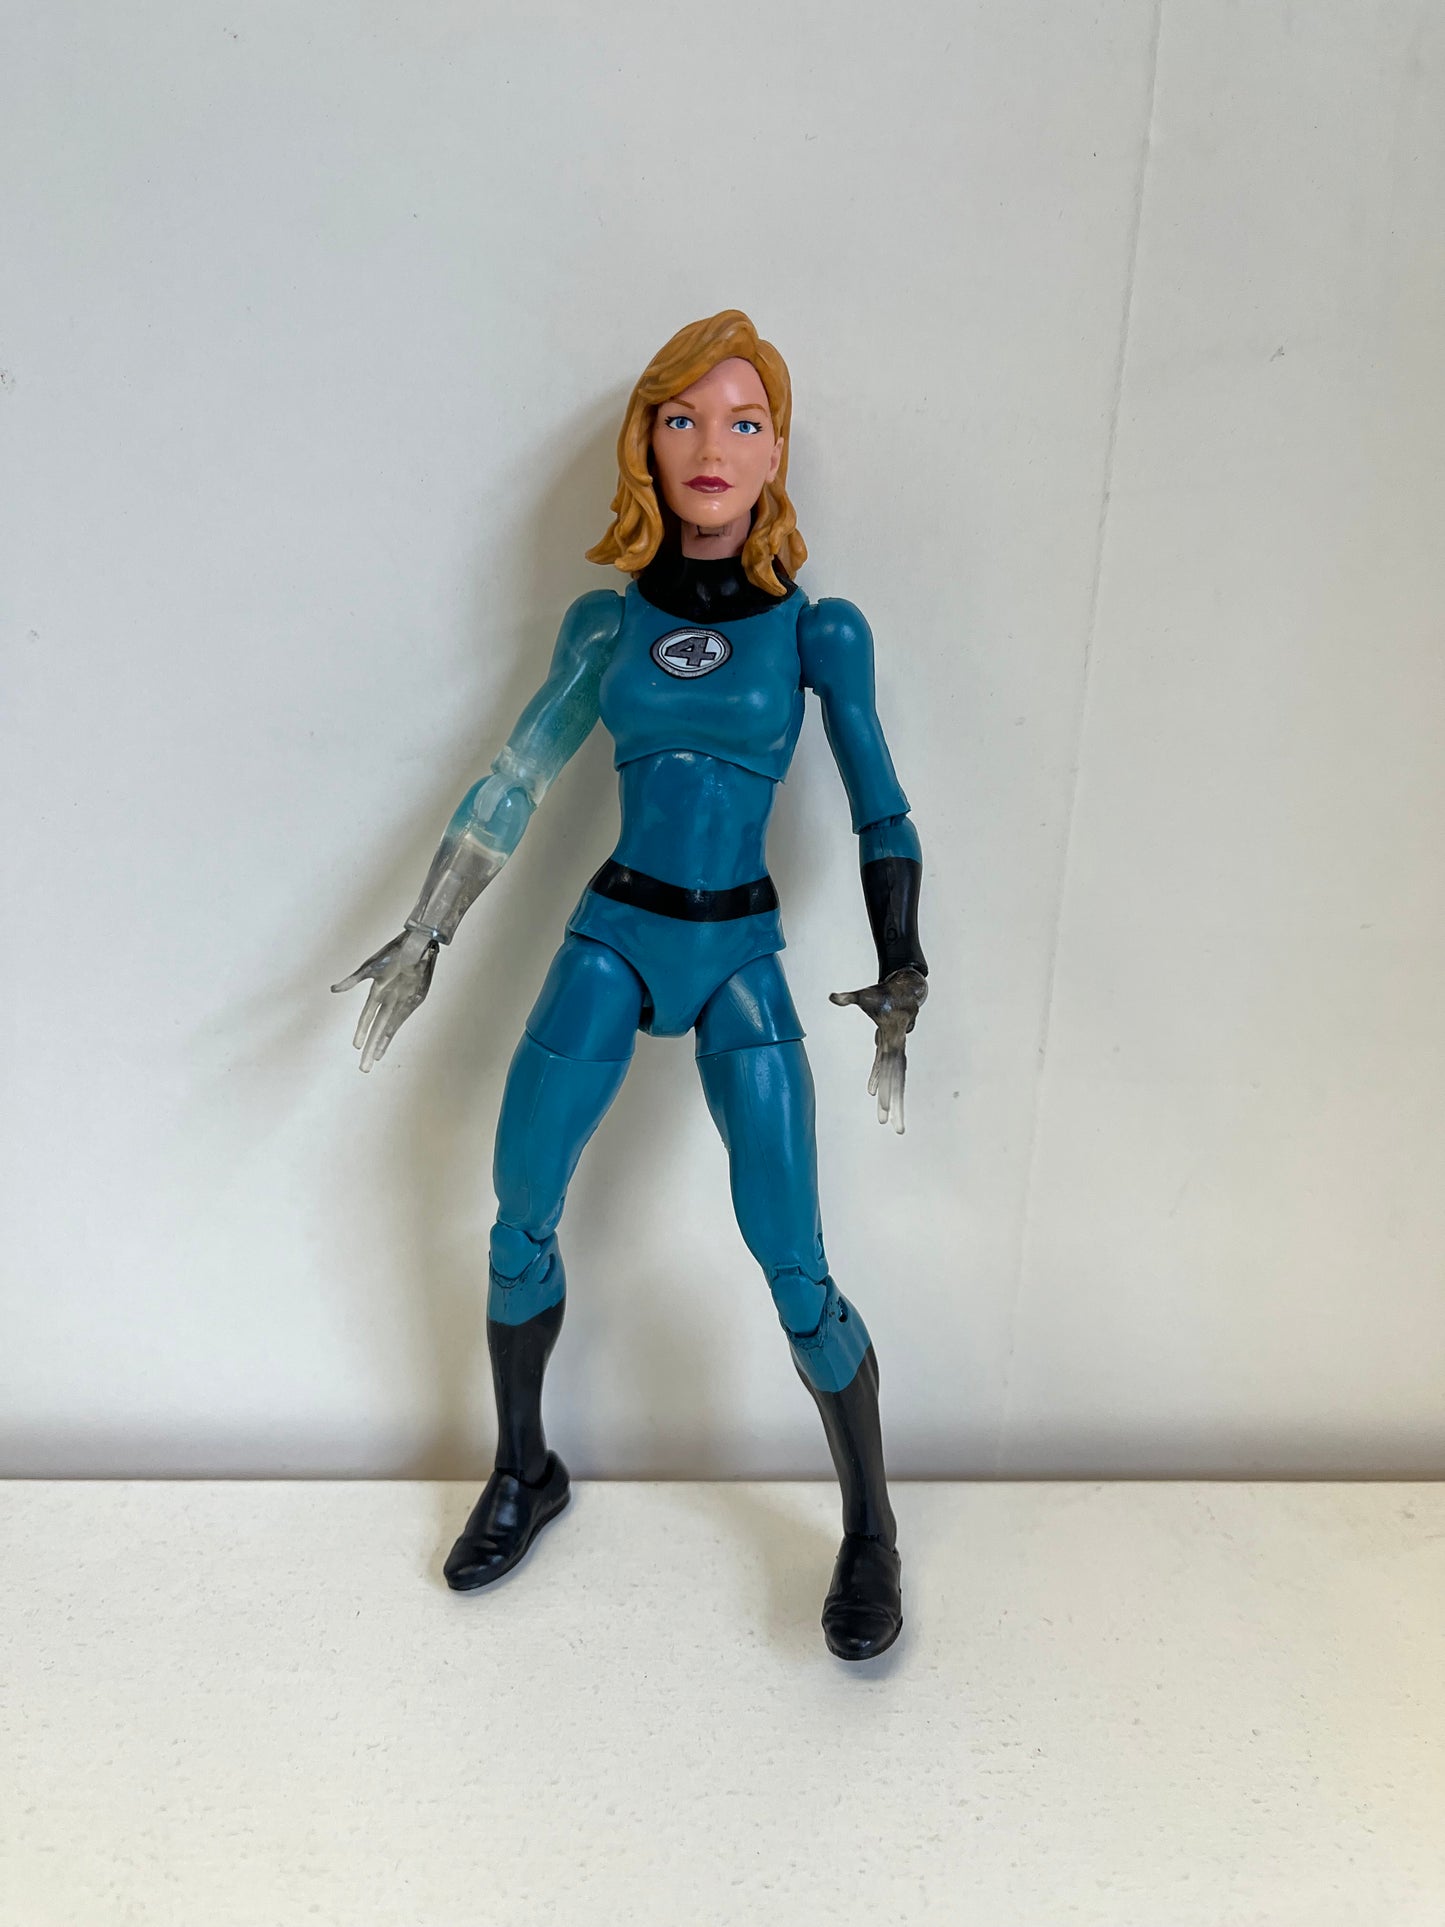 Marvel Legends Invisible Woman